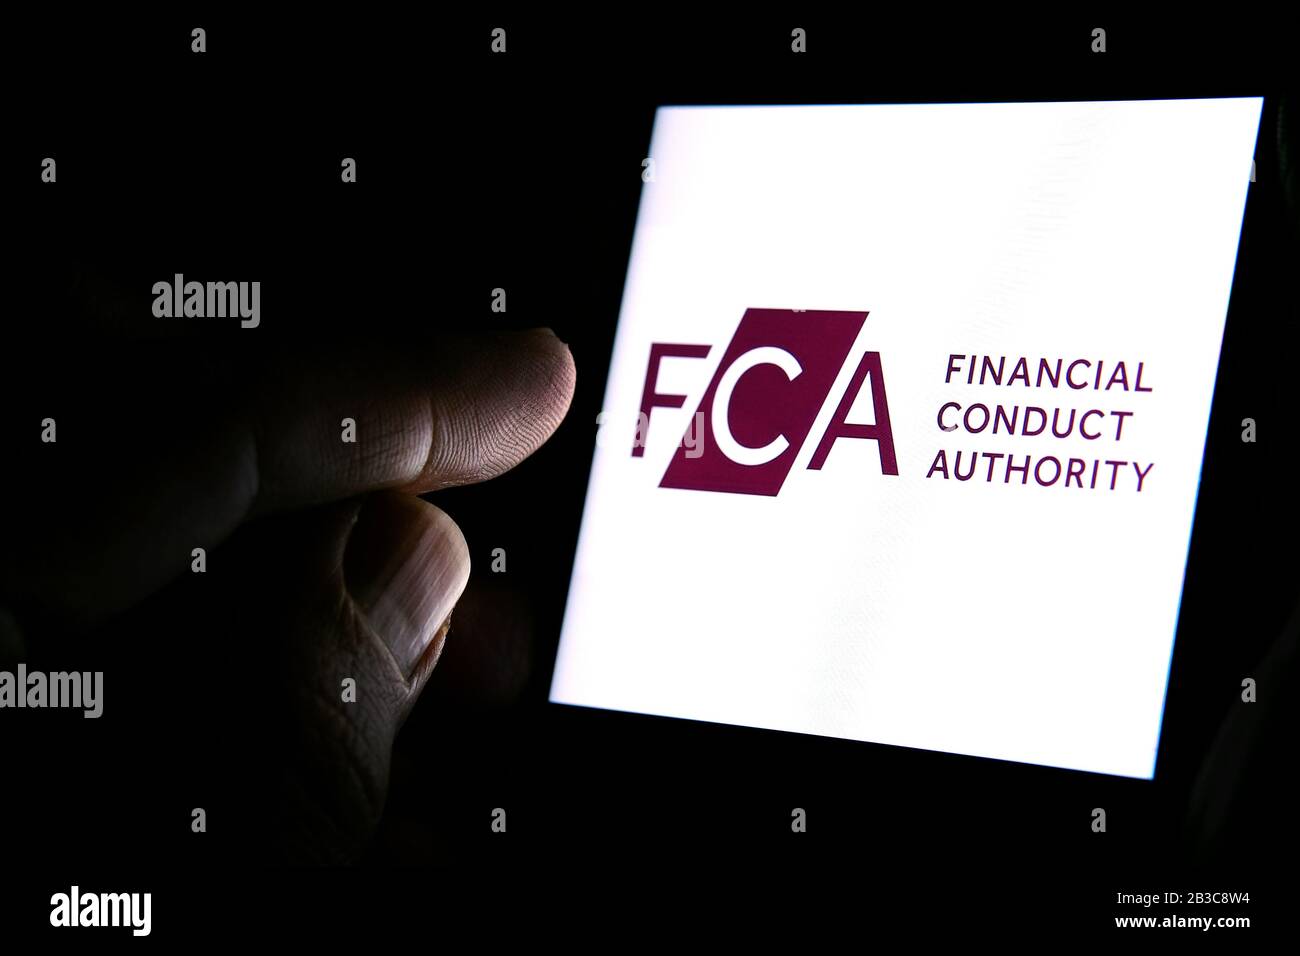 FCA Financial Conduct Authority logo on the smartphone and finger pointing at it in the dark room. Concept.  FCA is a financial regulatory body in UK Stock Photo